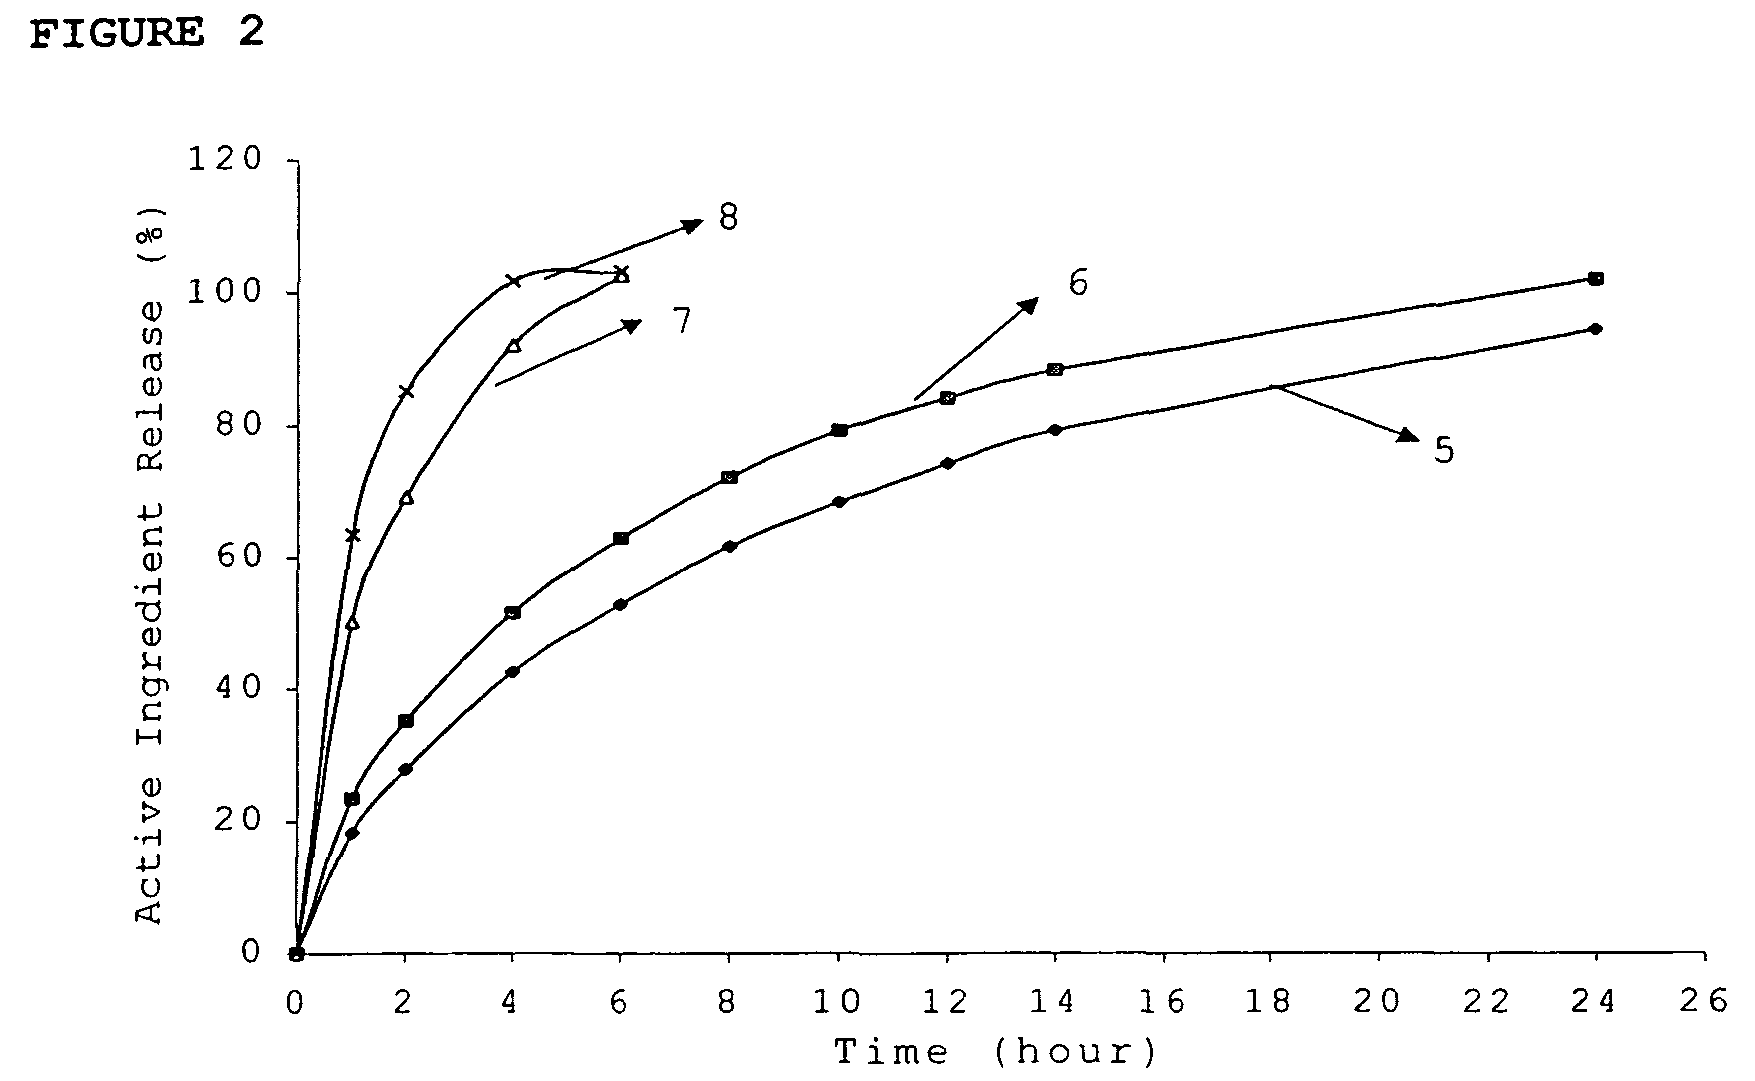 Modified release composition of highly soluble drugs